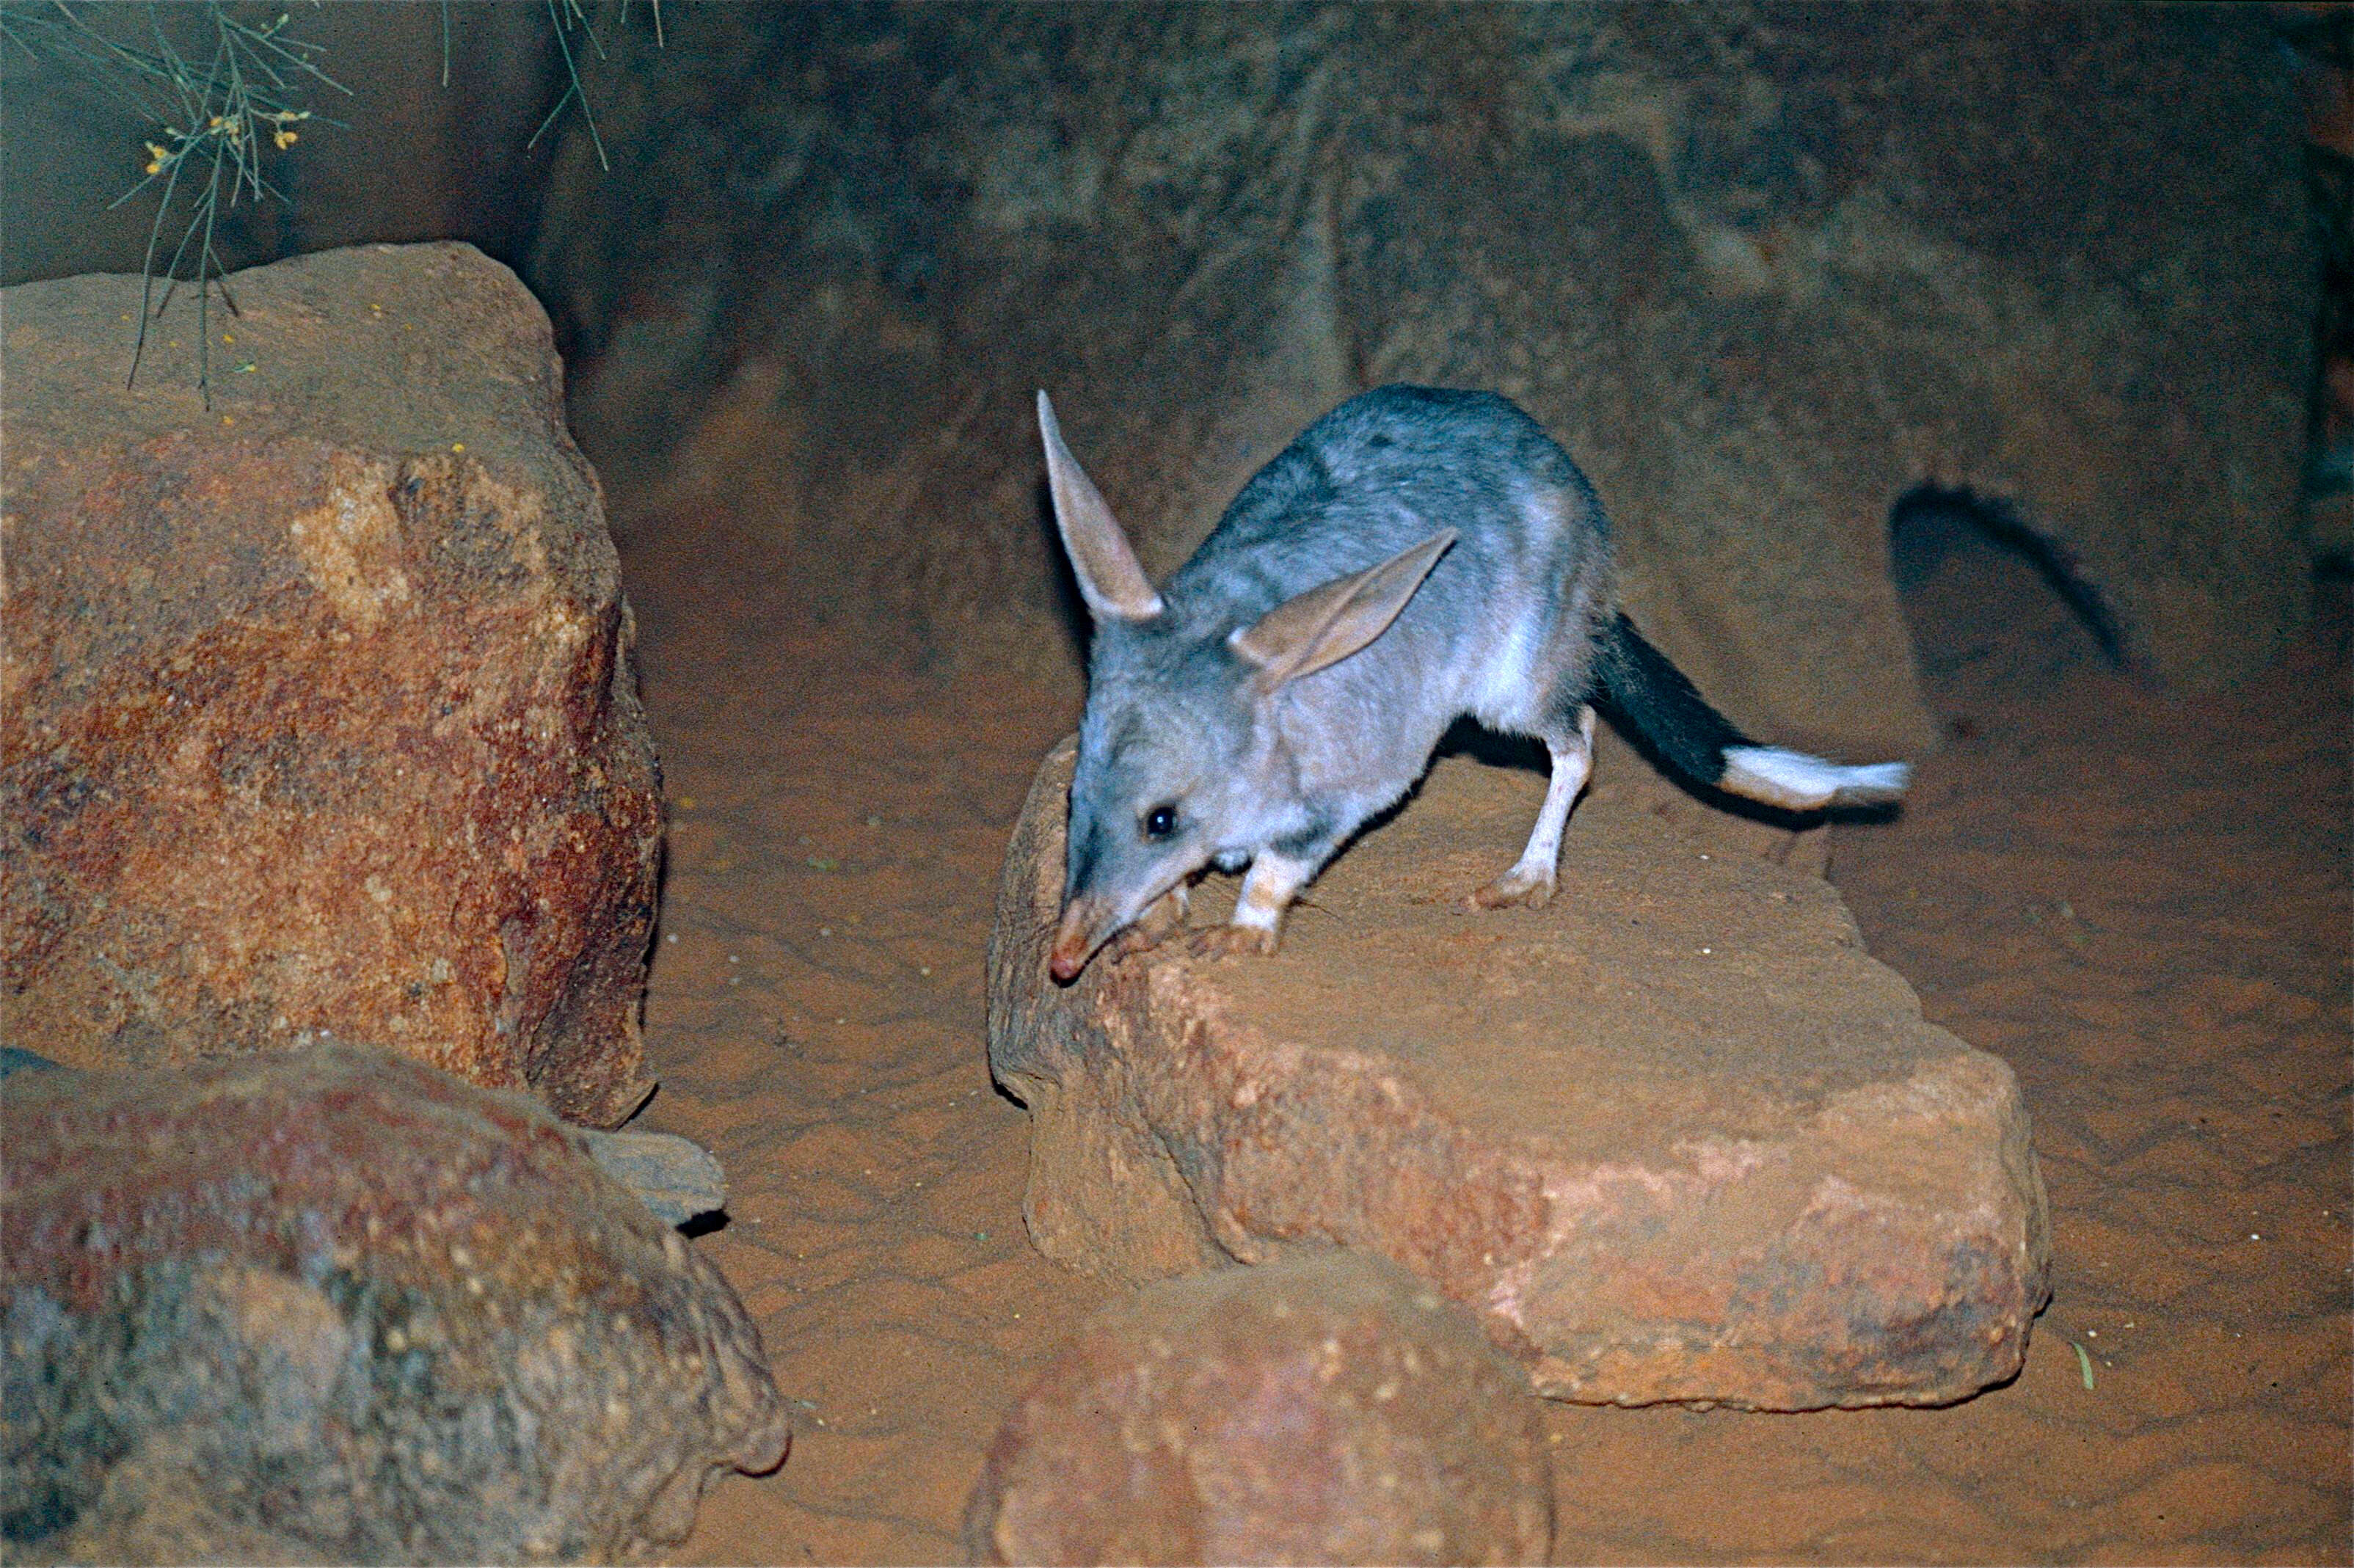 Image of synapsids